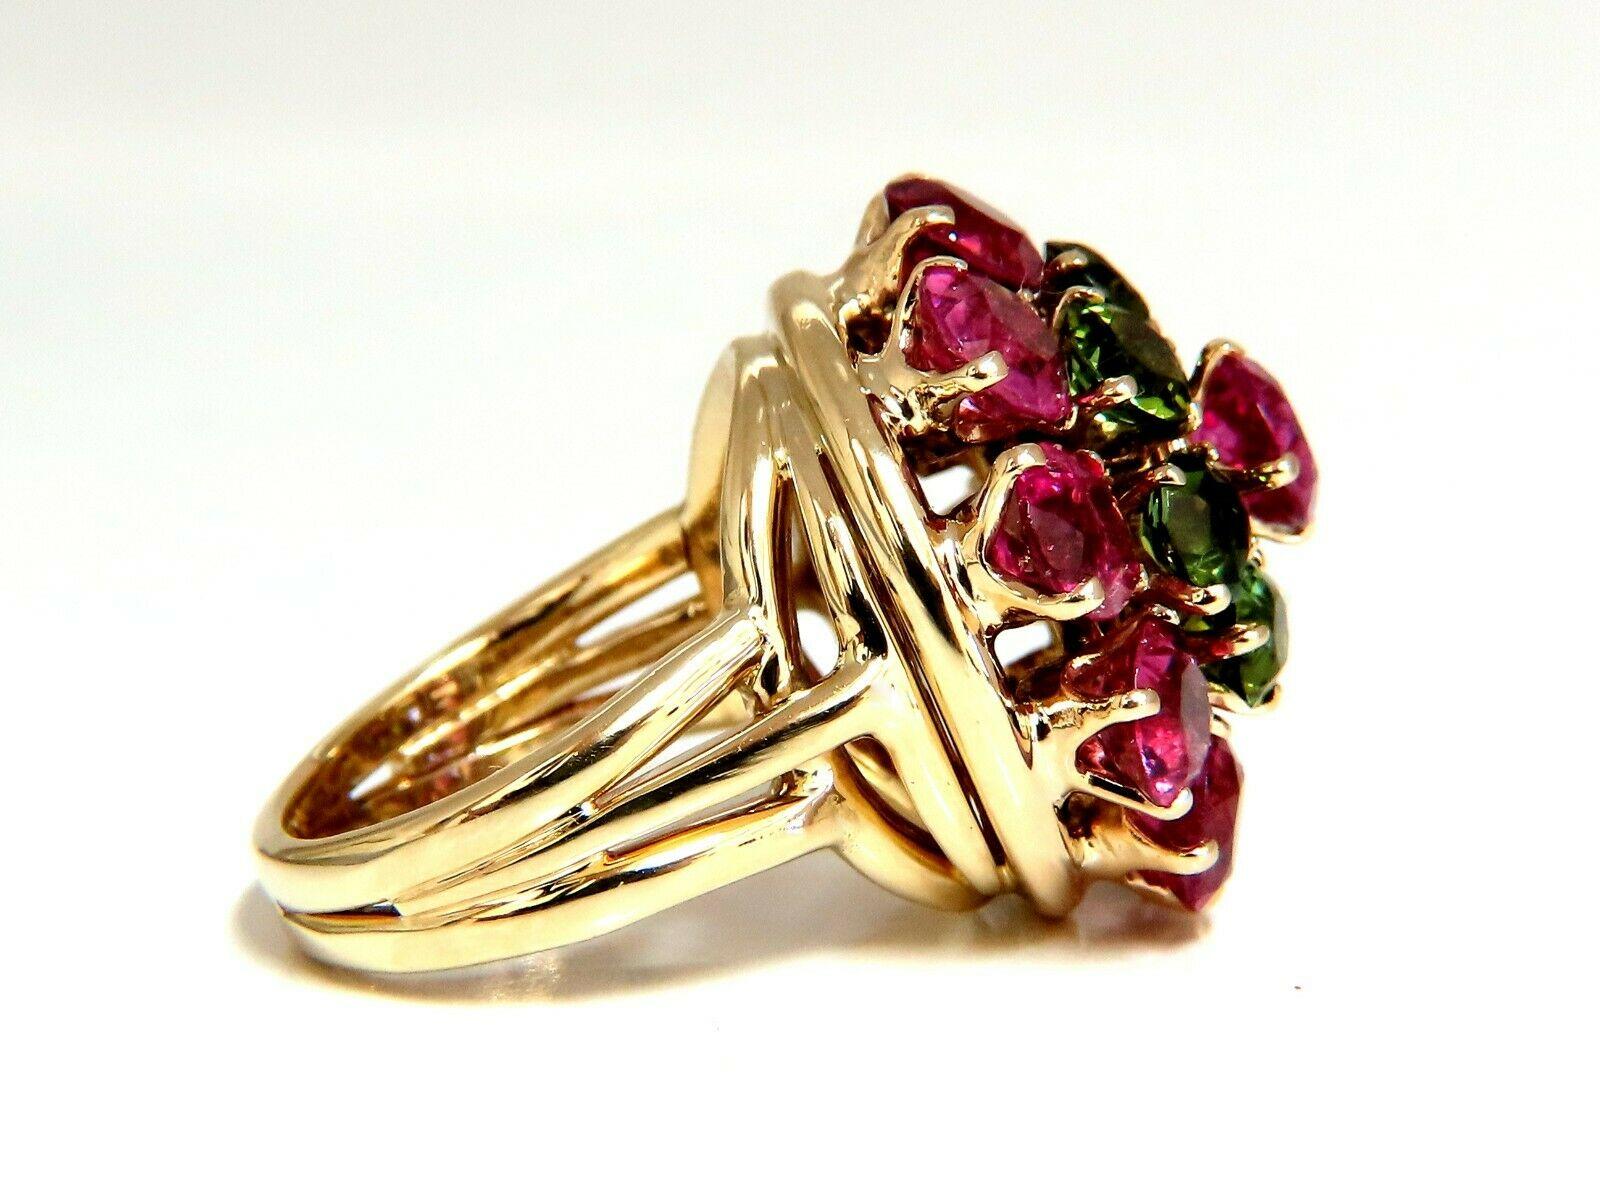 Ballerina Gypsy European Prime Raised Three Dome Circular Roulette Class

7.00ct. Natural Bright Pink Tourmaline ring.

clean clarity

11 Fine Gem Tourmalines

6mm diameter

3.50ct natural round Green Tourmalines.

14kt. yellow gold 

depth of ring: